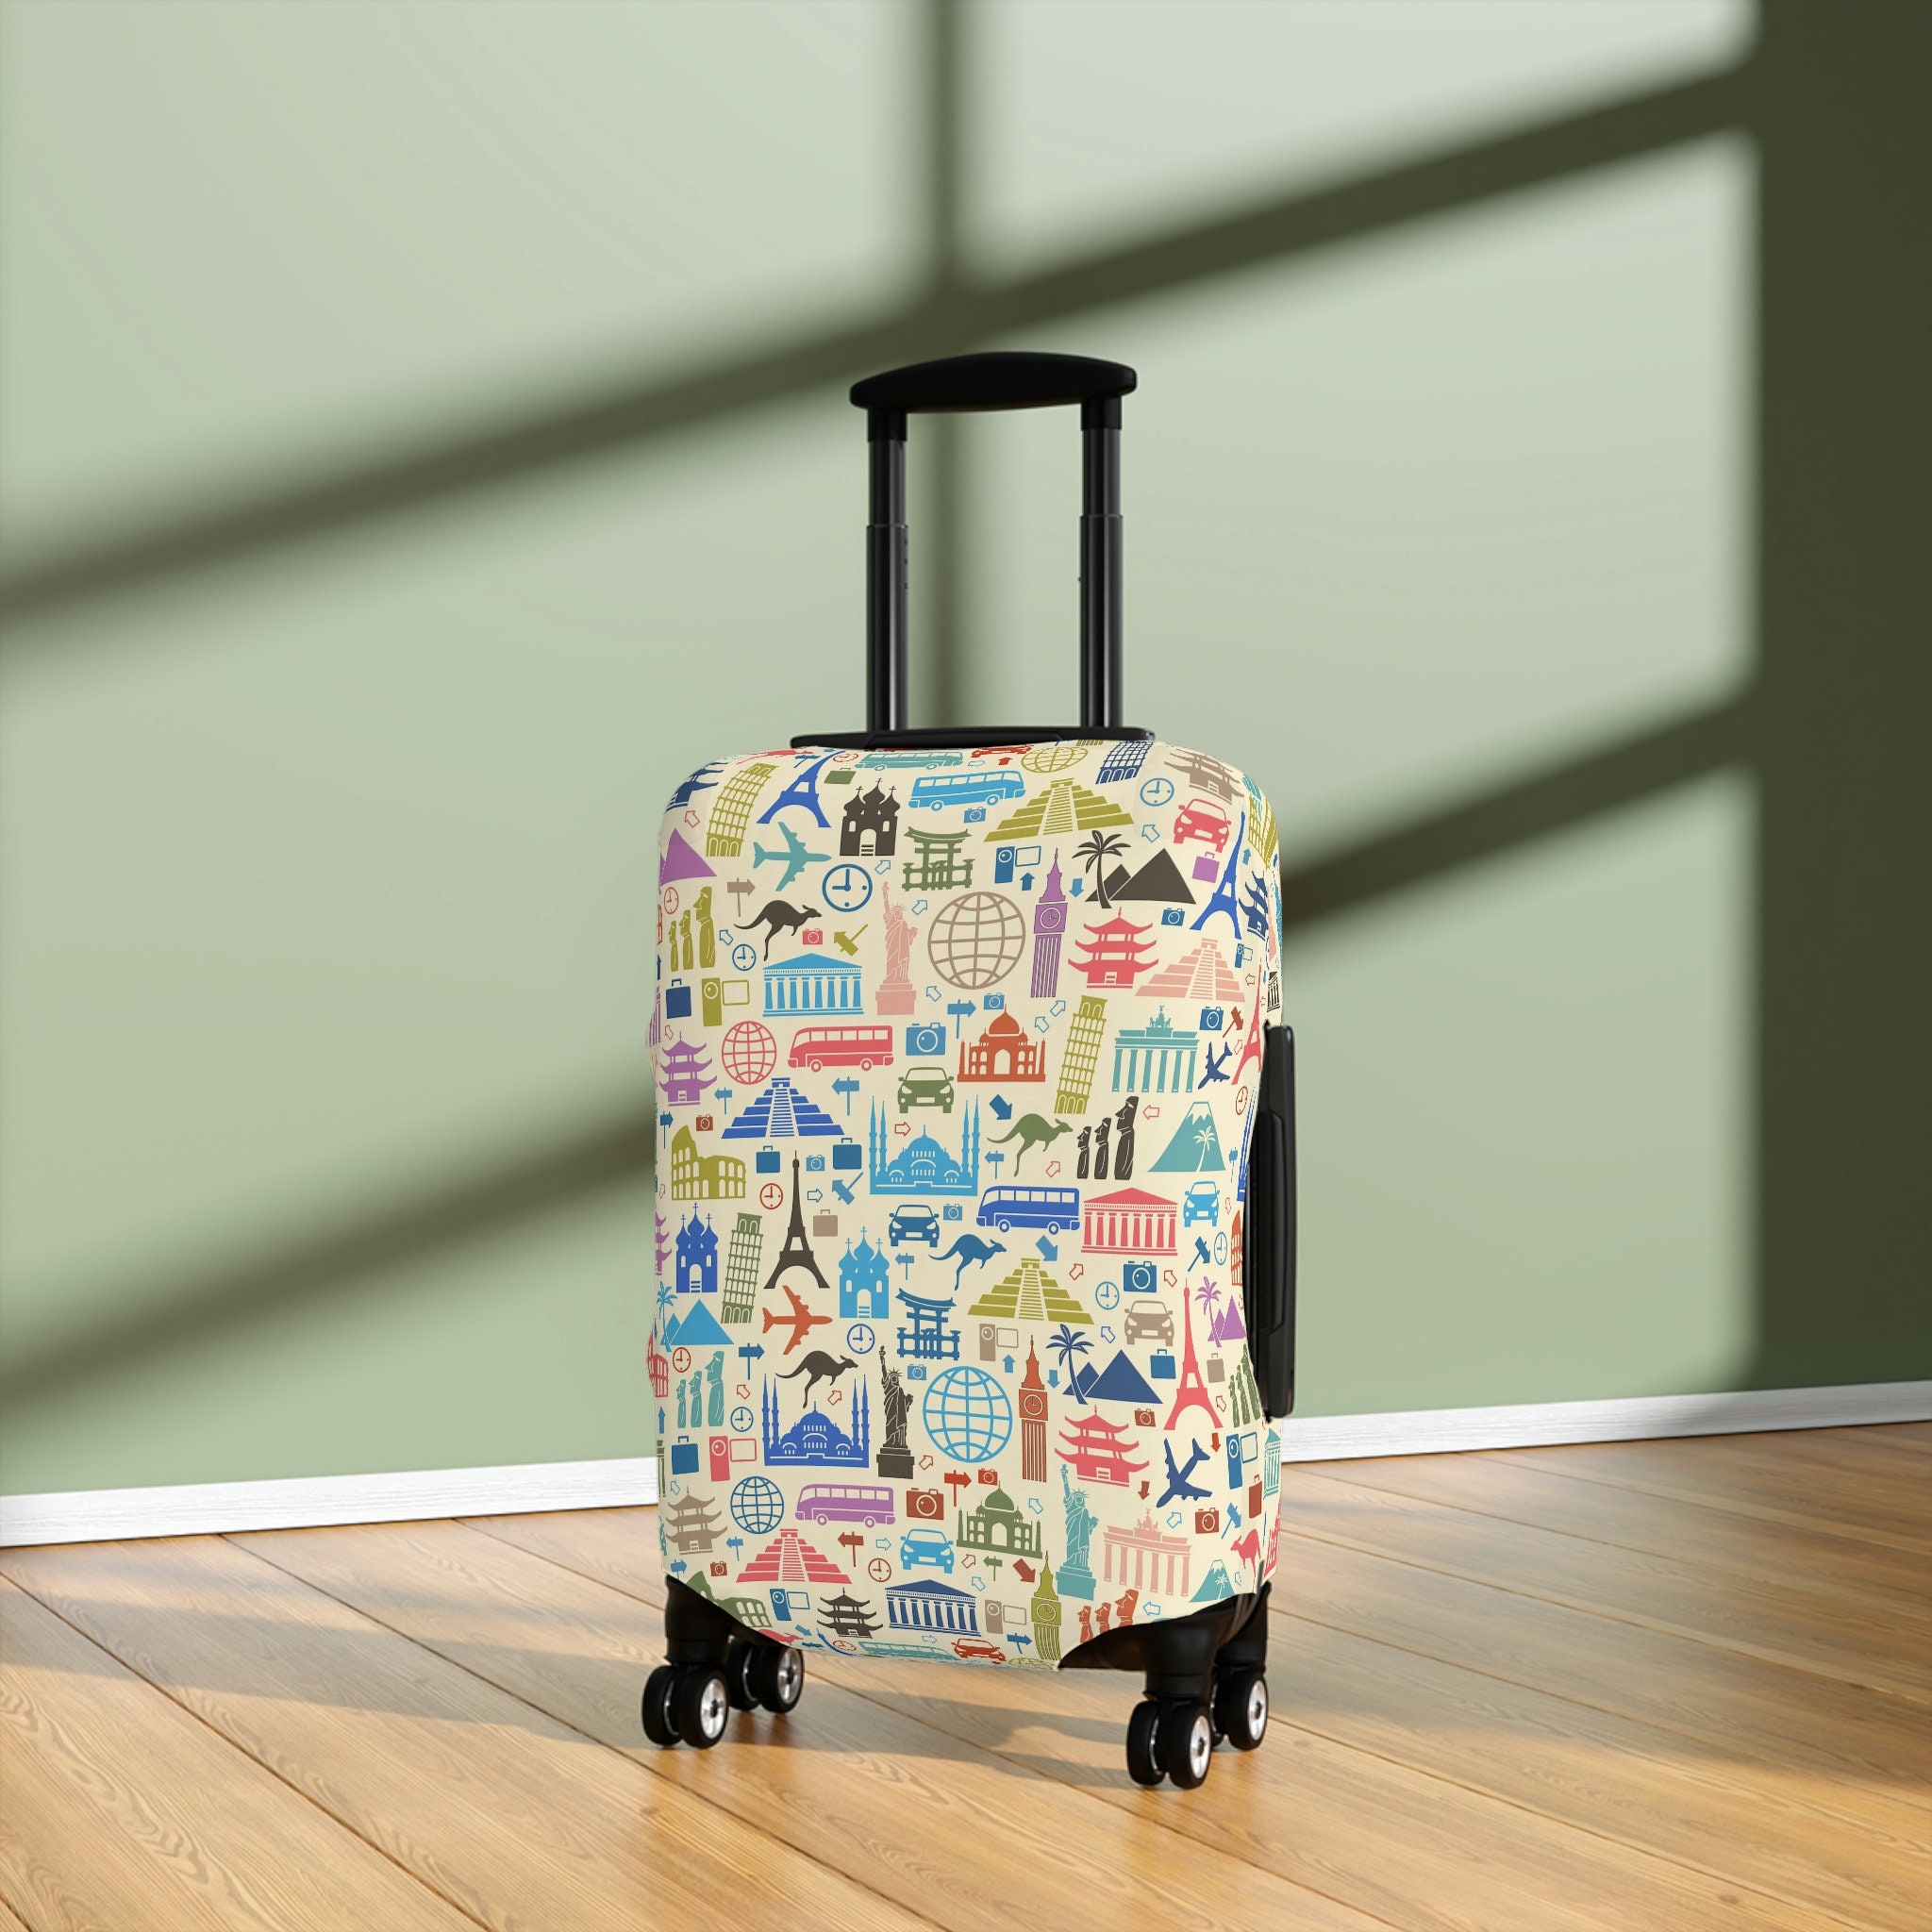 Vacation travels Custom Designed Luggage Cover